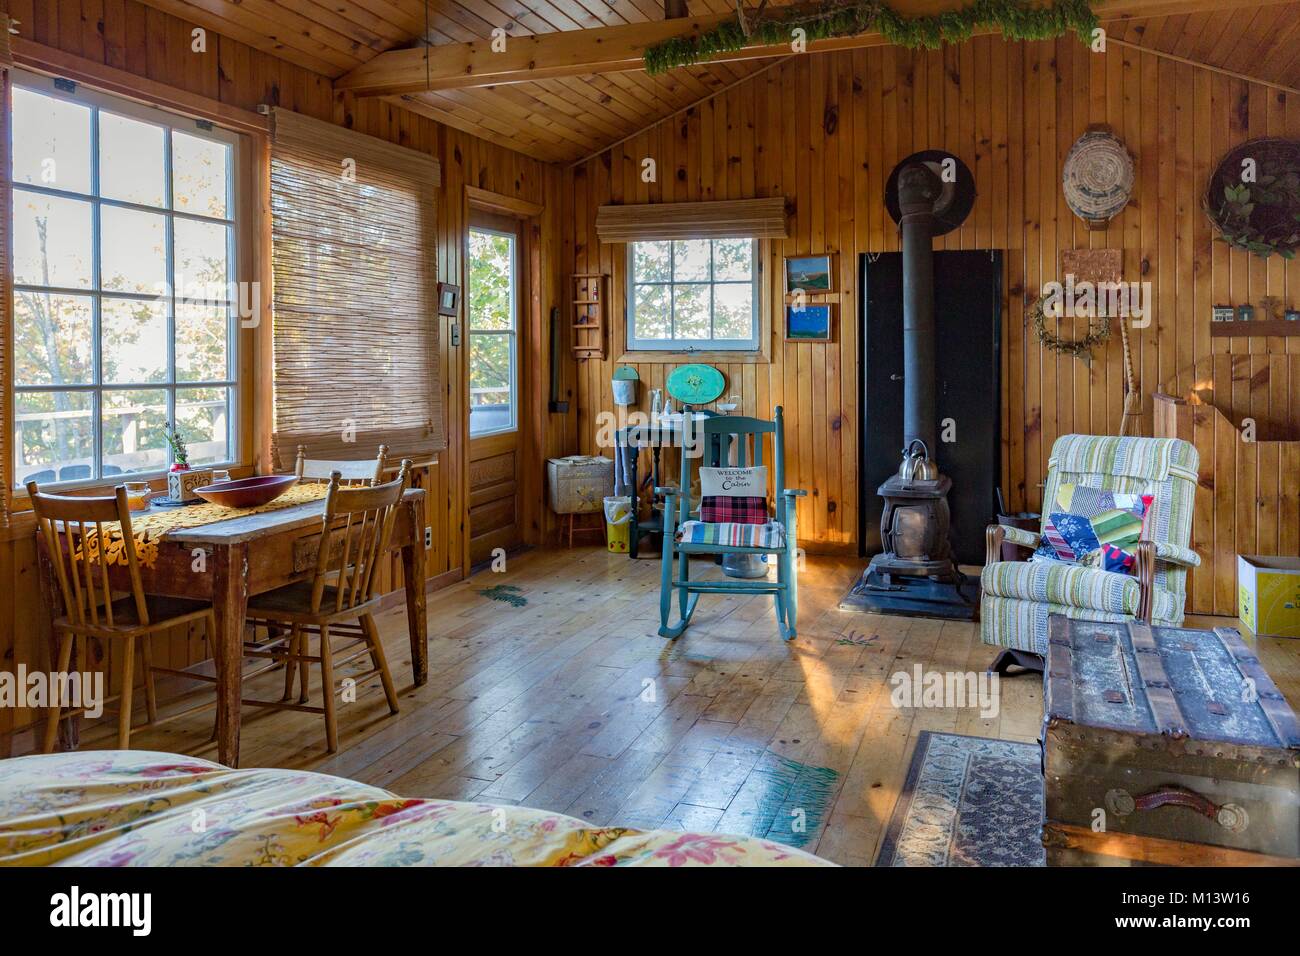 anada, Province of Quebec, Outaouais, Pontiac region, Chichester, Northfork Inn, rustic room in a cabin in the middle of the woods Stock Photo